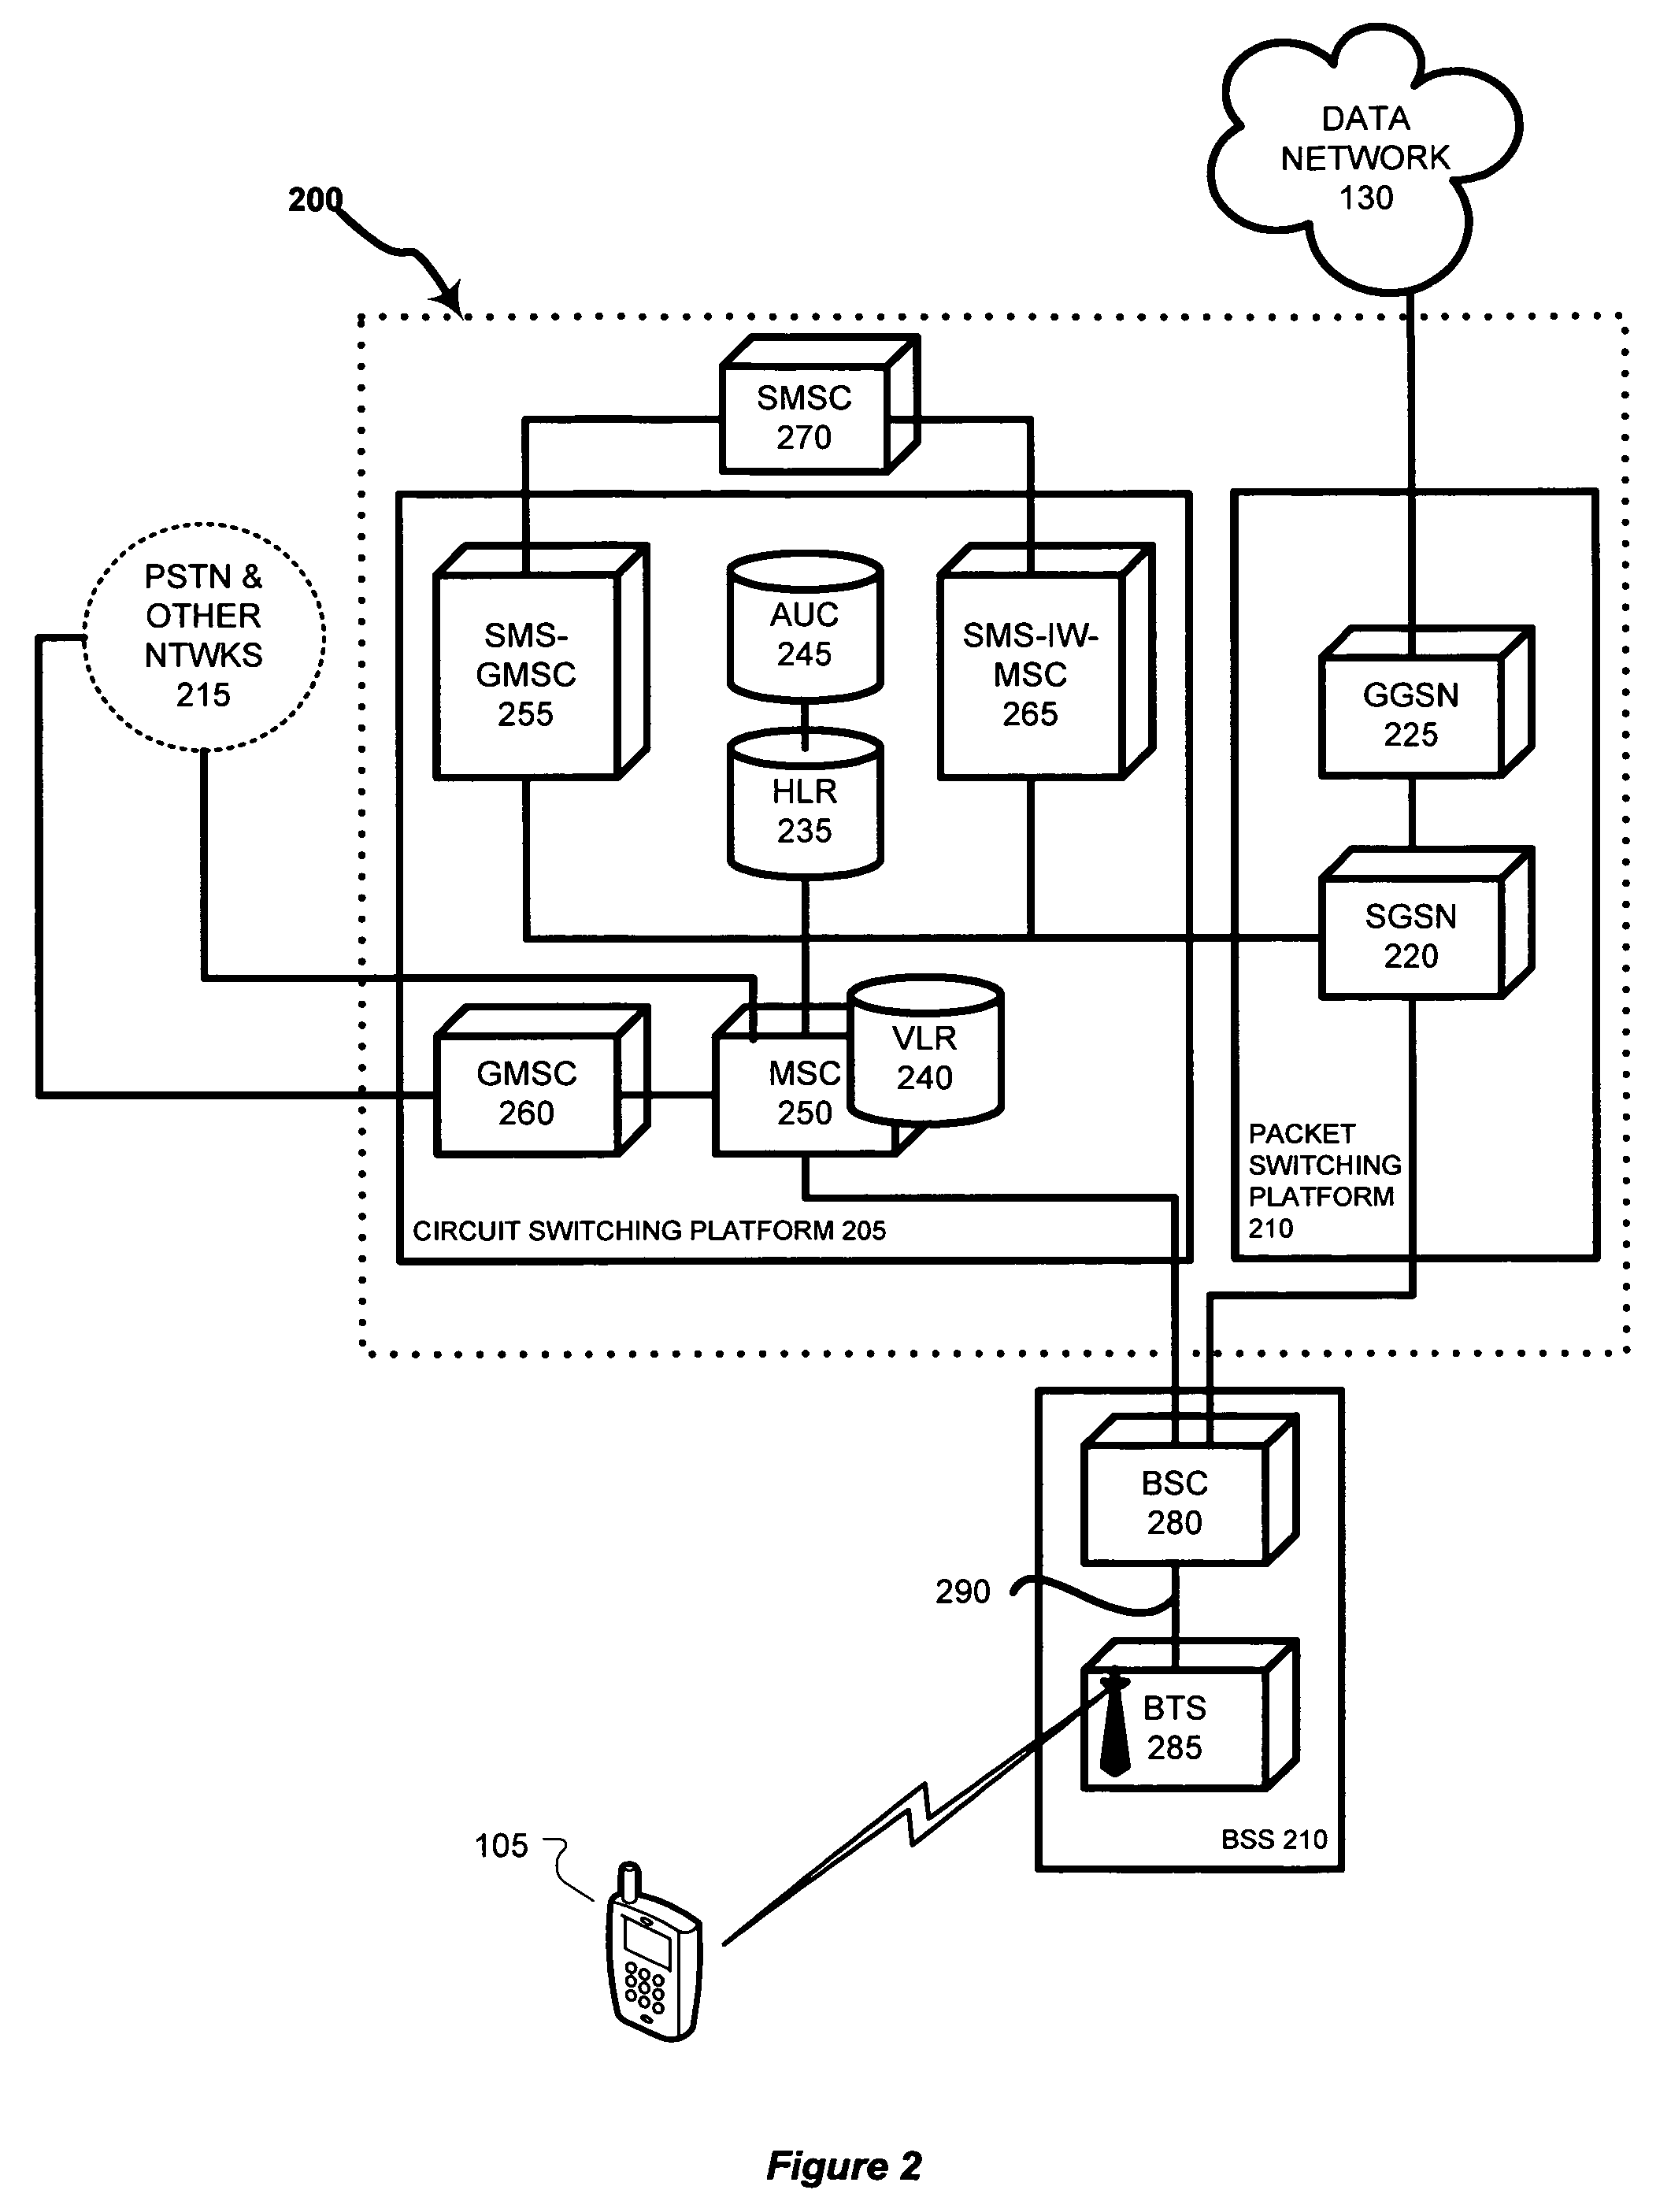 Systems and methods for providing mobile advertising and directory assistance services